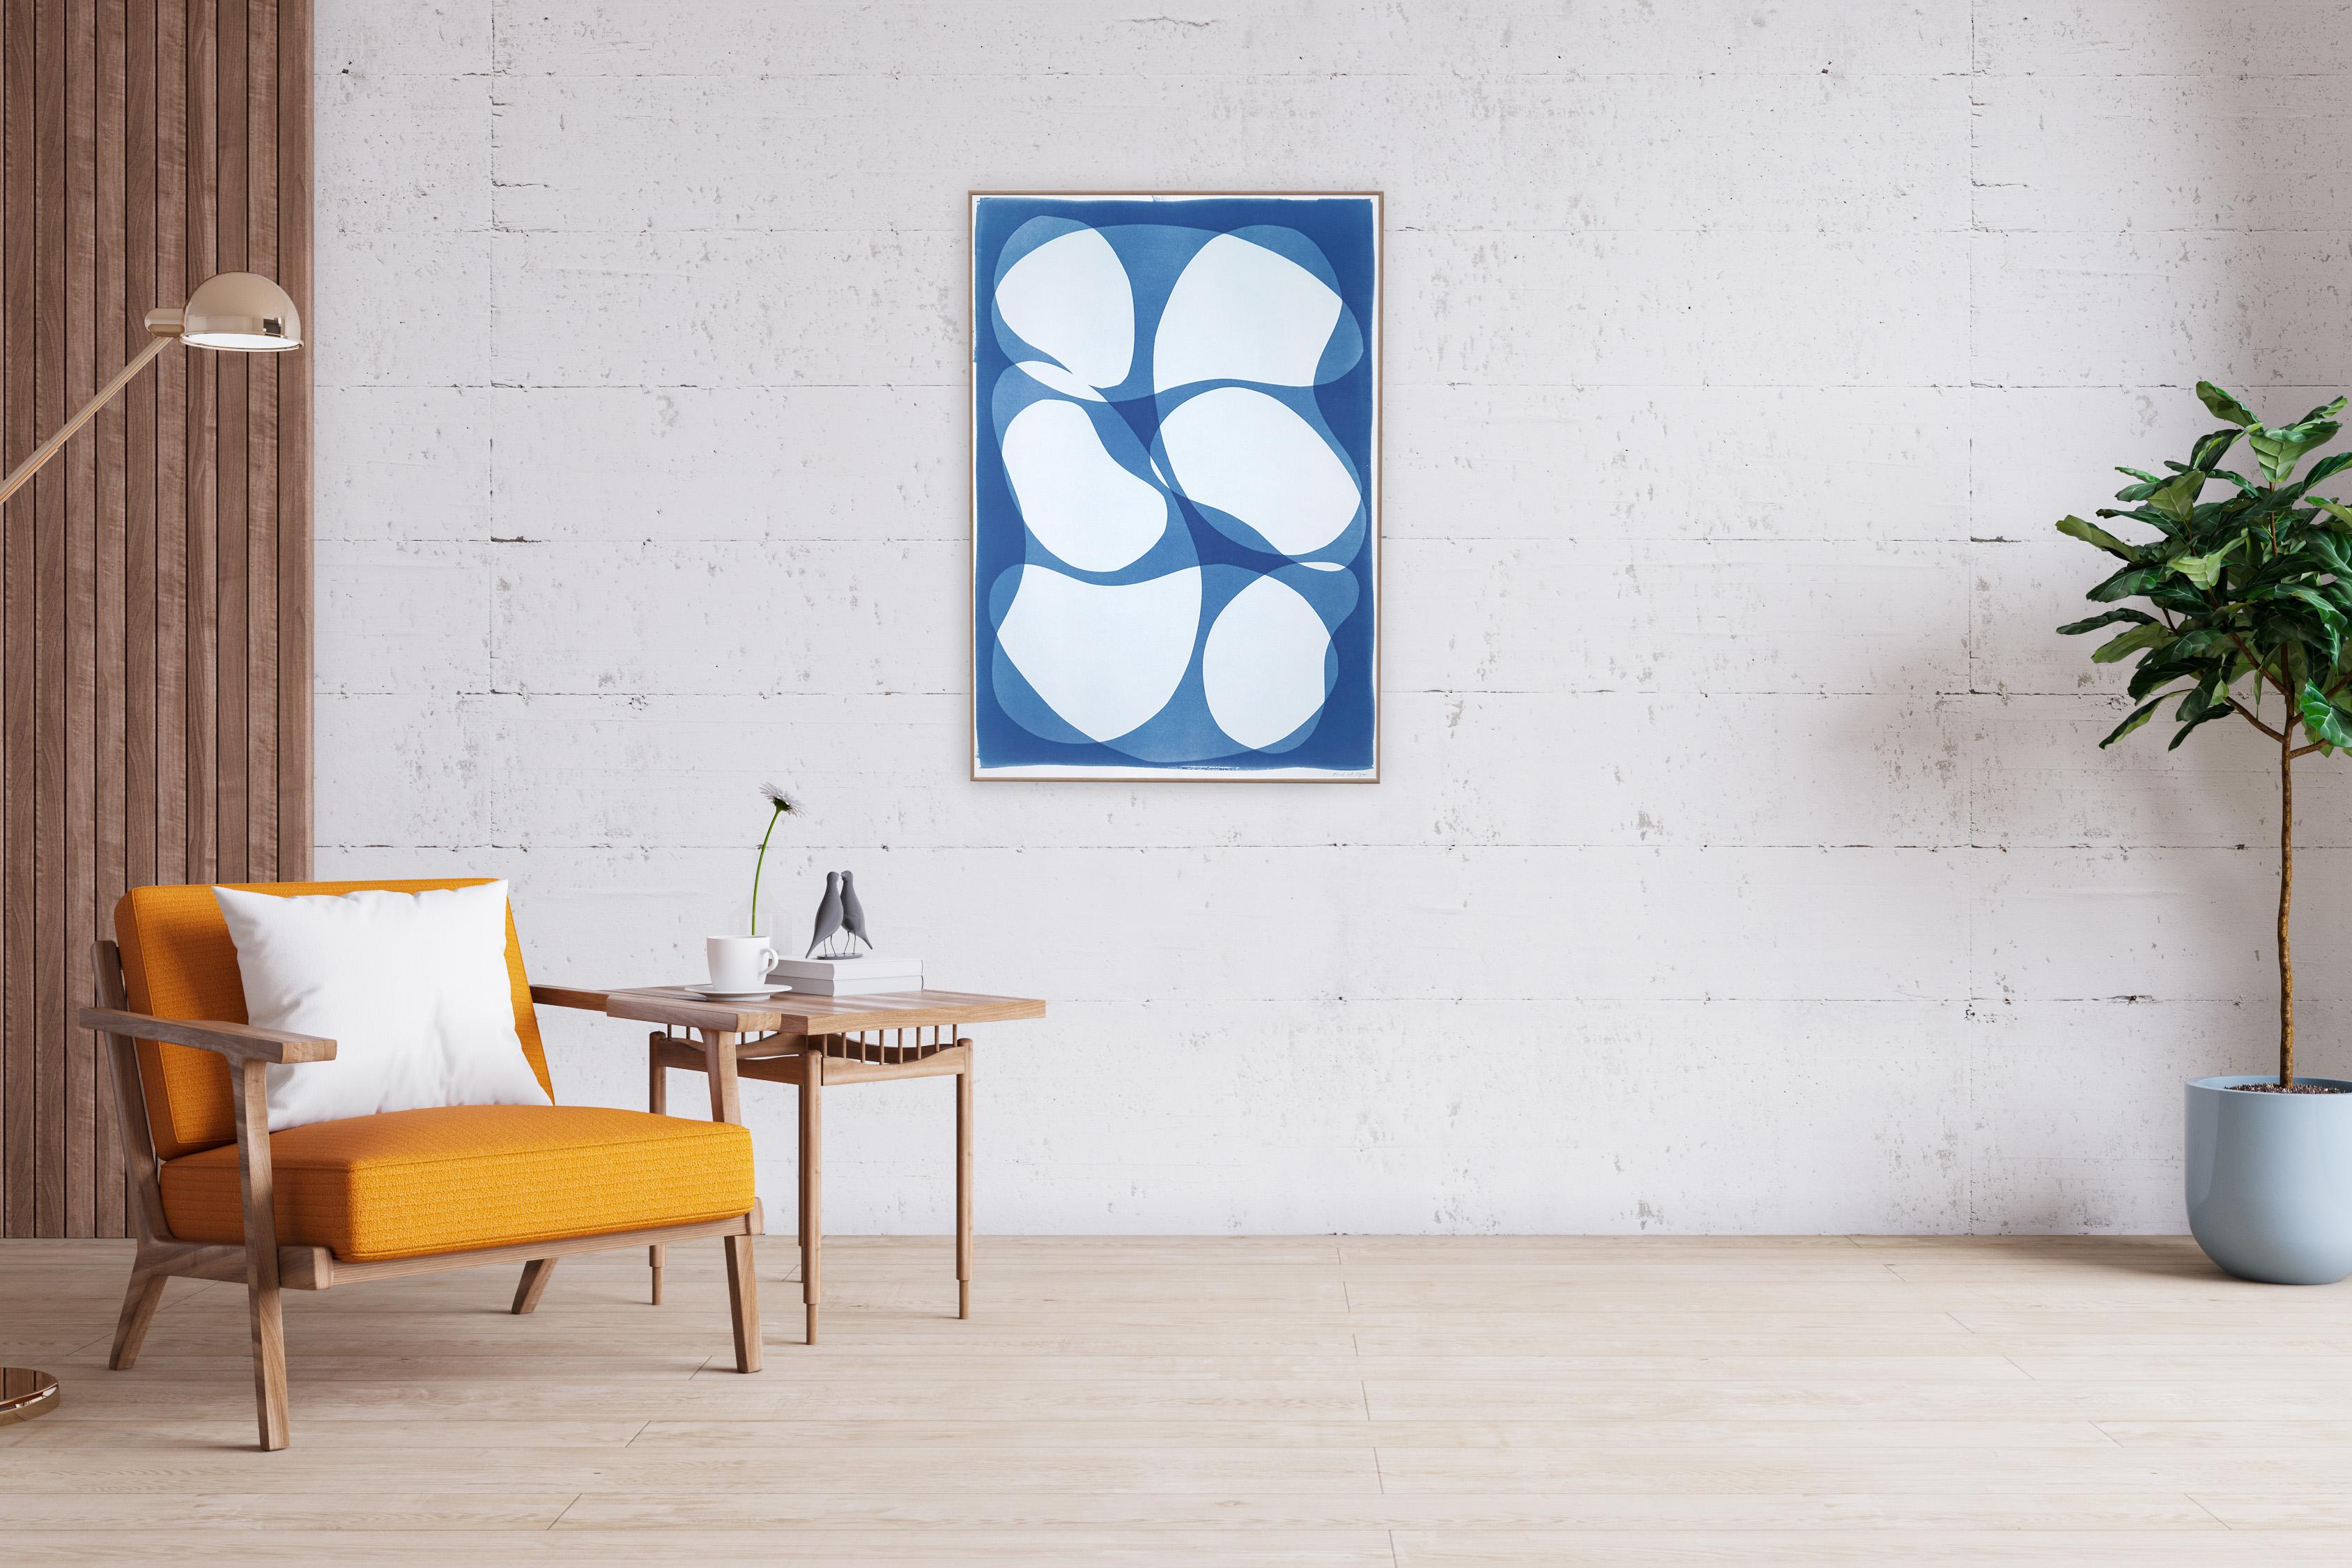 This is an exclusive handprinted unique cyanotype that takes its inspiration from the mid-century modern shapes.
It's made by layering paper cutouts and different exposures using uv-light. 

Details:
+ Title: Abstract Rounded Type
+ Year: 2022
+